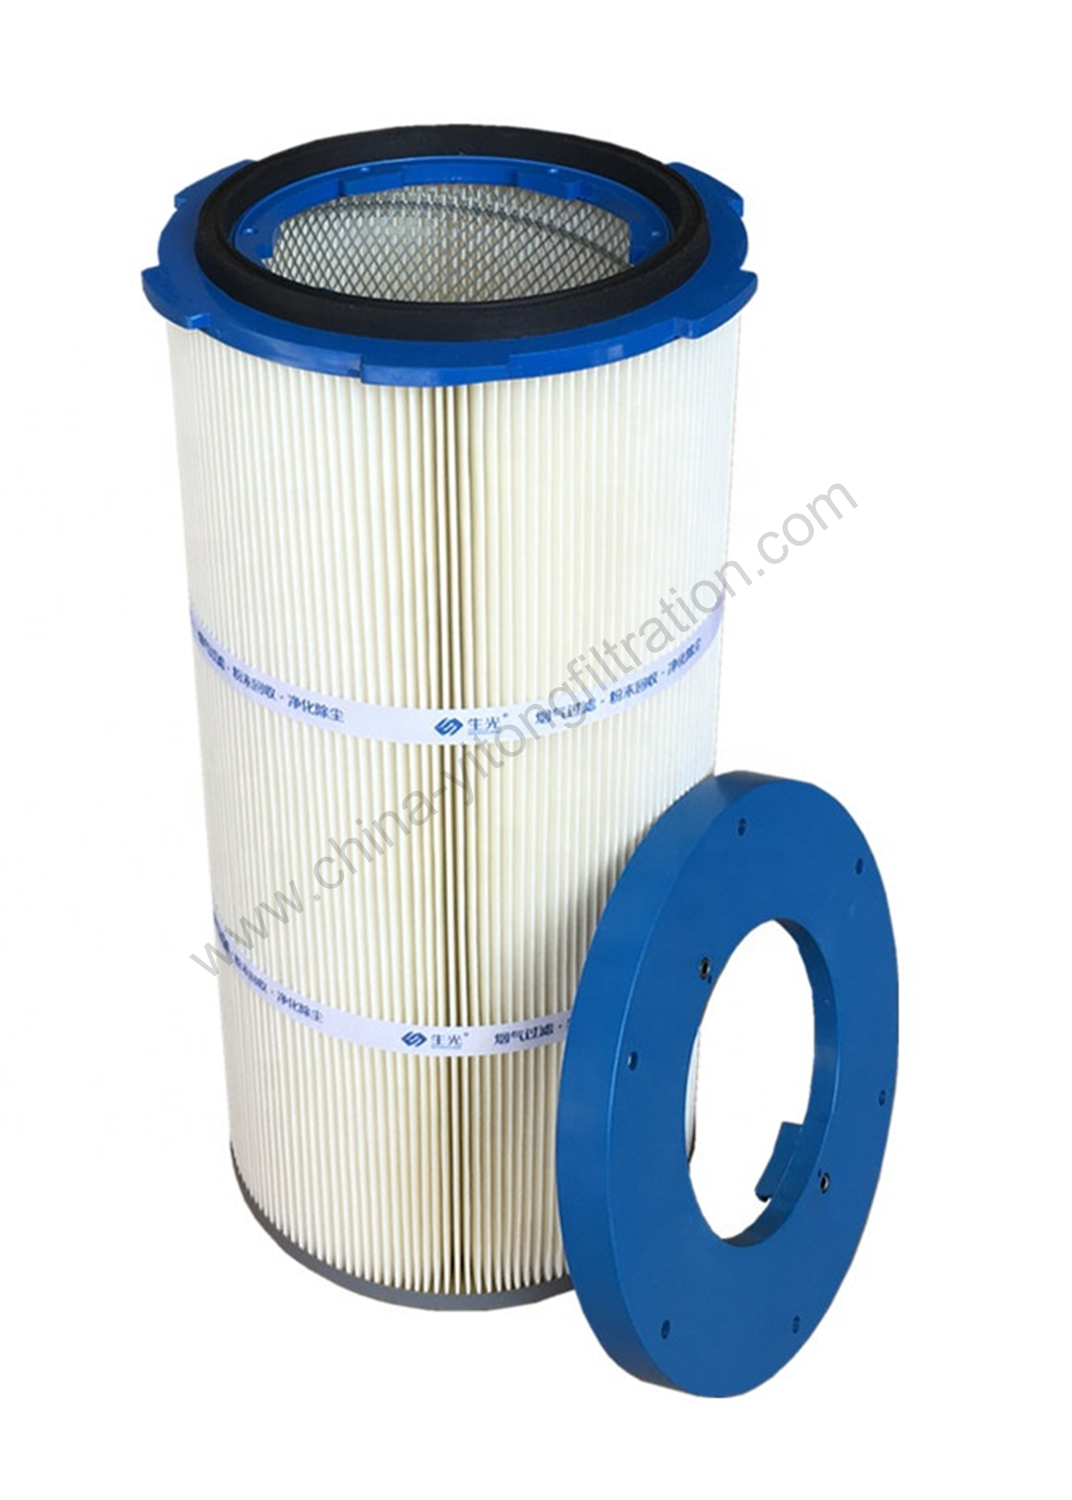 Welded Dust removal Filter Cartridge